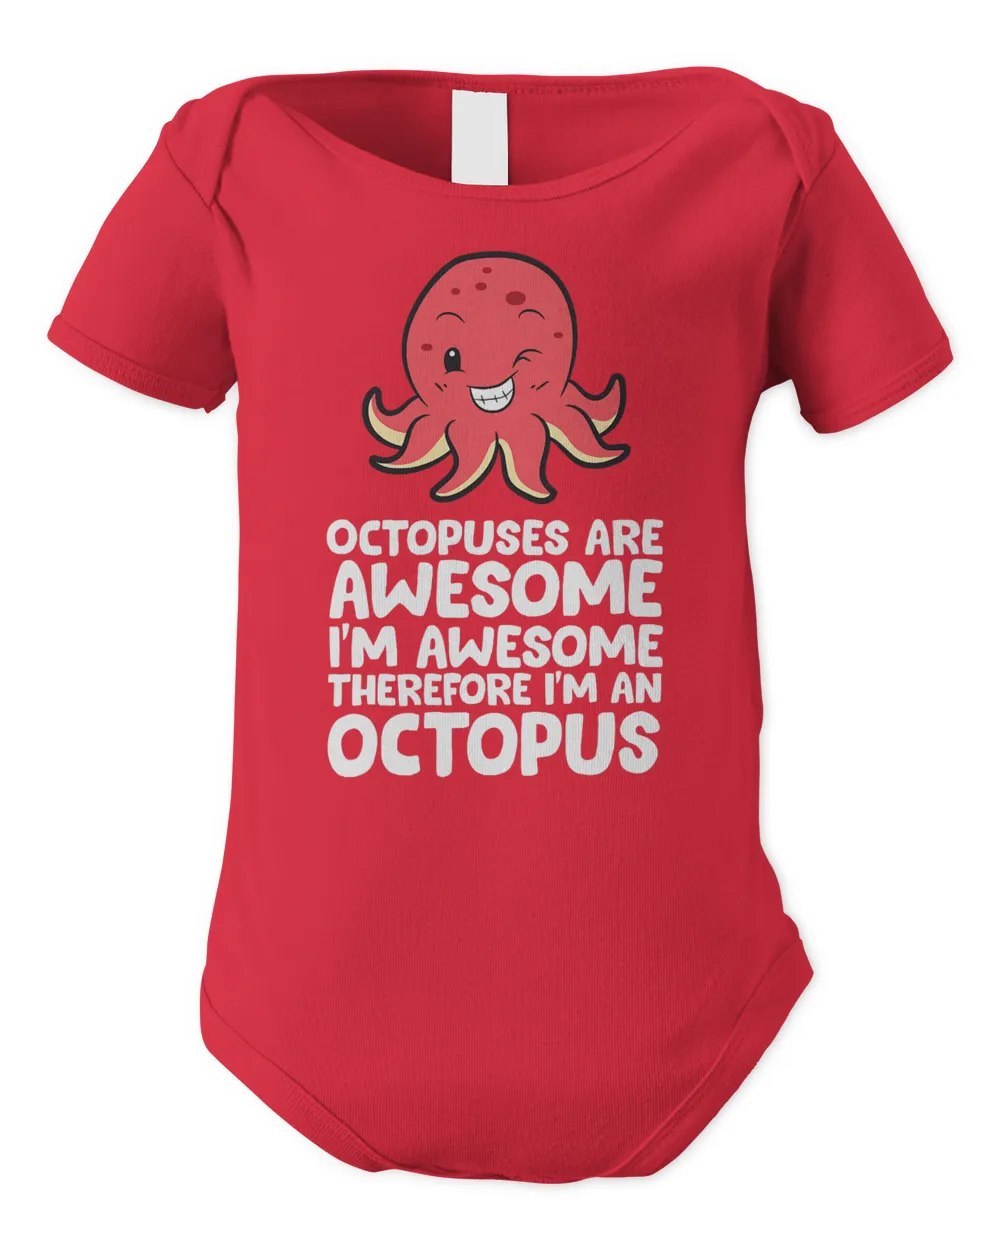 Octopuses Are Awesome I'm Awesome Therefore I Am An Octopus T-Shirt